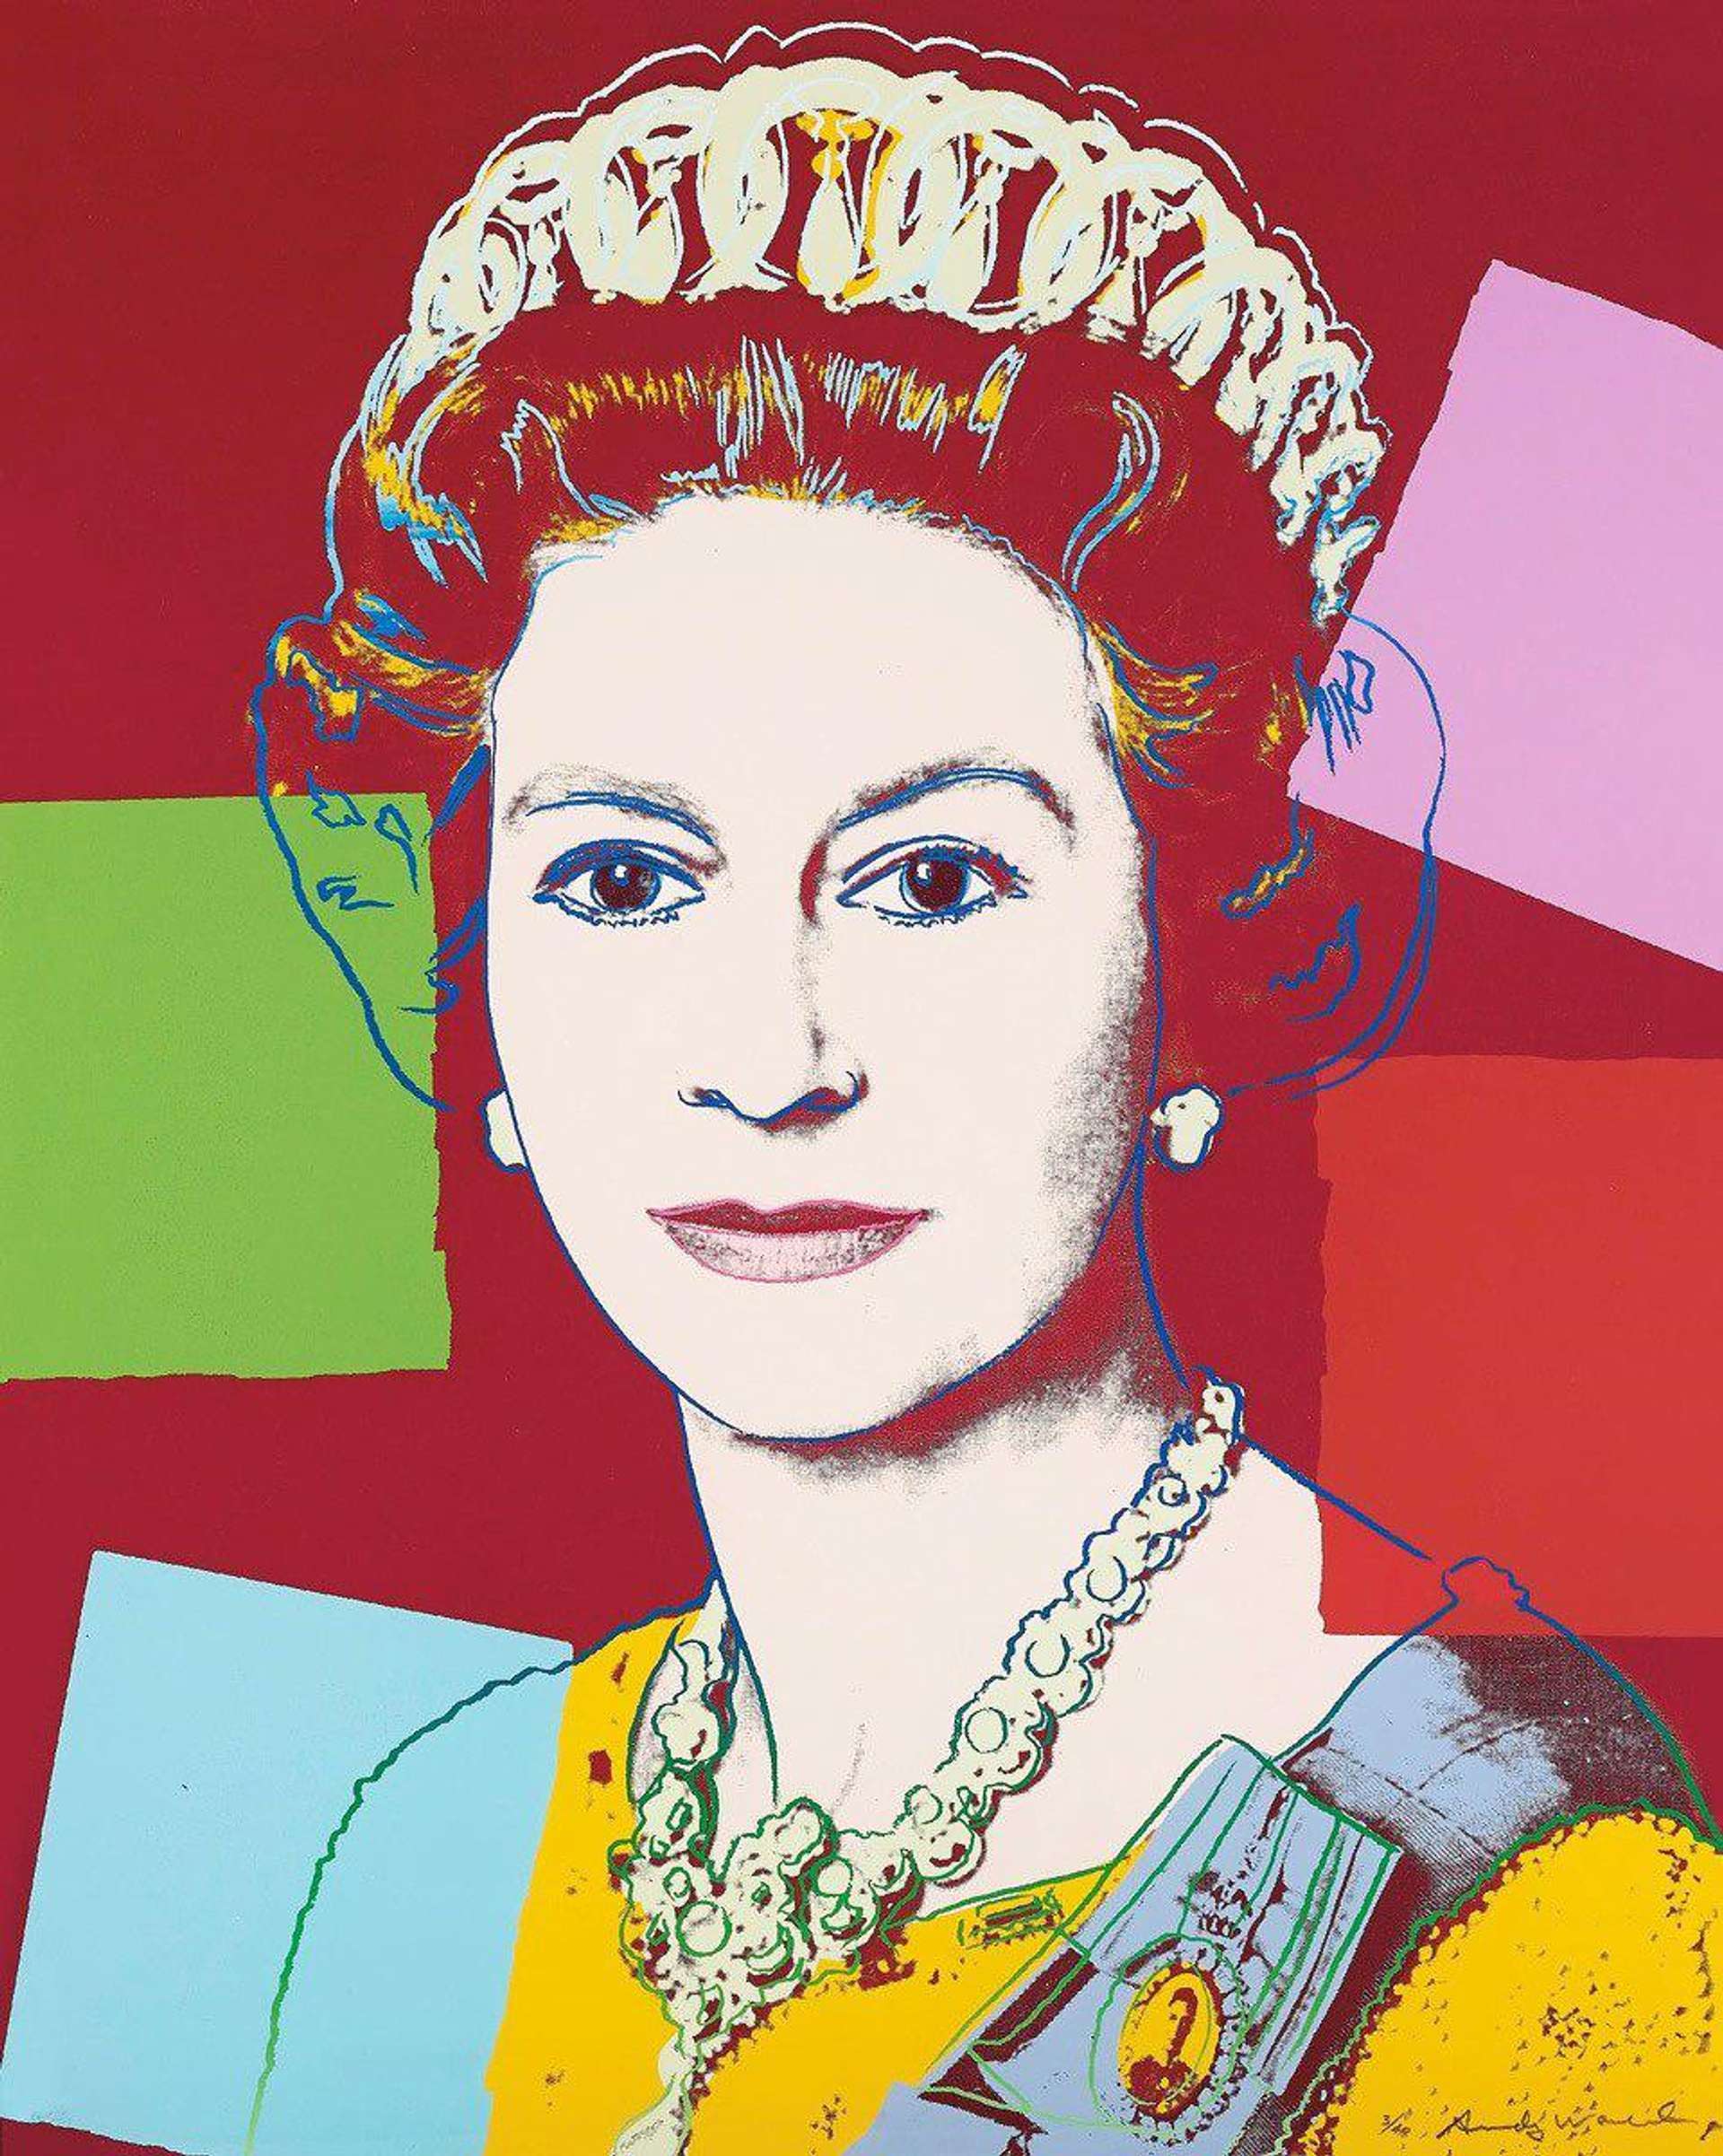 A young Queen Elizabeth II wearing her royal crown and jewellery in the forefront of a red background with accents of light blue, pink, and light green in the style of Pop Art.